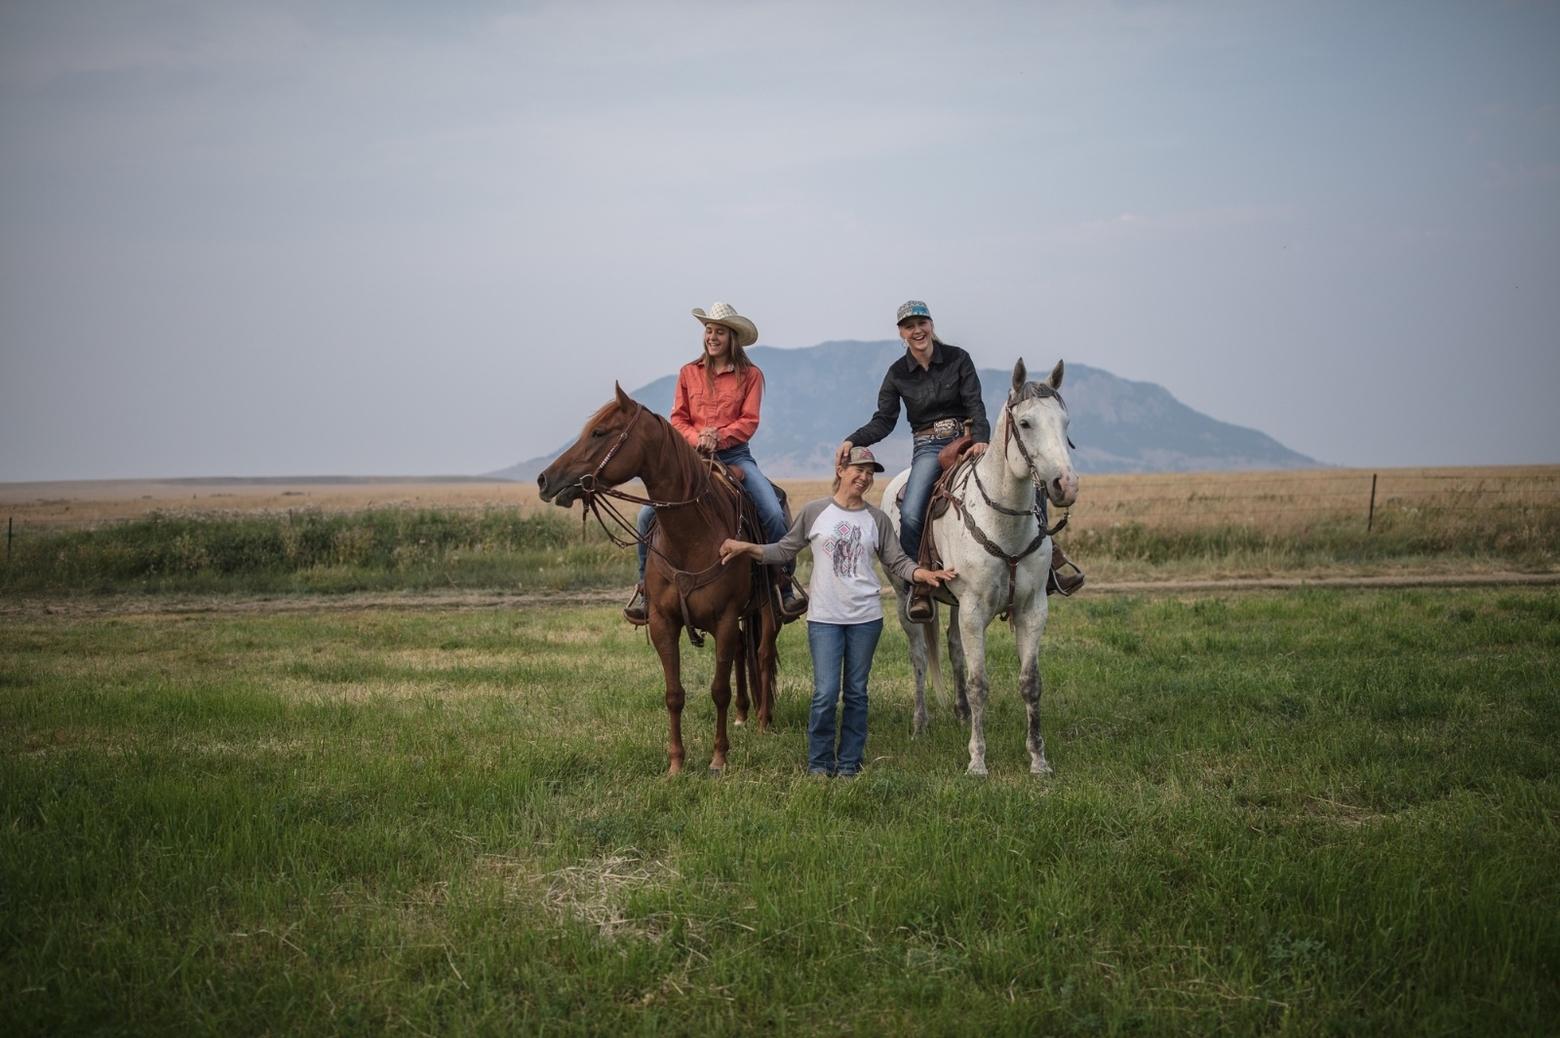 Irene and Sadie Johnson with their mother, Nicole, on their home ranch, the U-Cross near Roy, Montana. Nicole Johnson and her husband Lance have been on this ranch for 18 years where they have raised their girls.&nbsp; Photo by Louise Johns